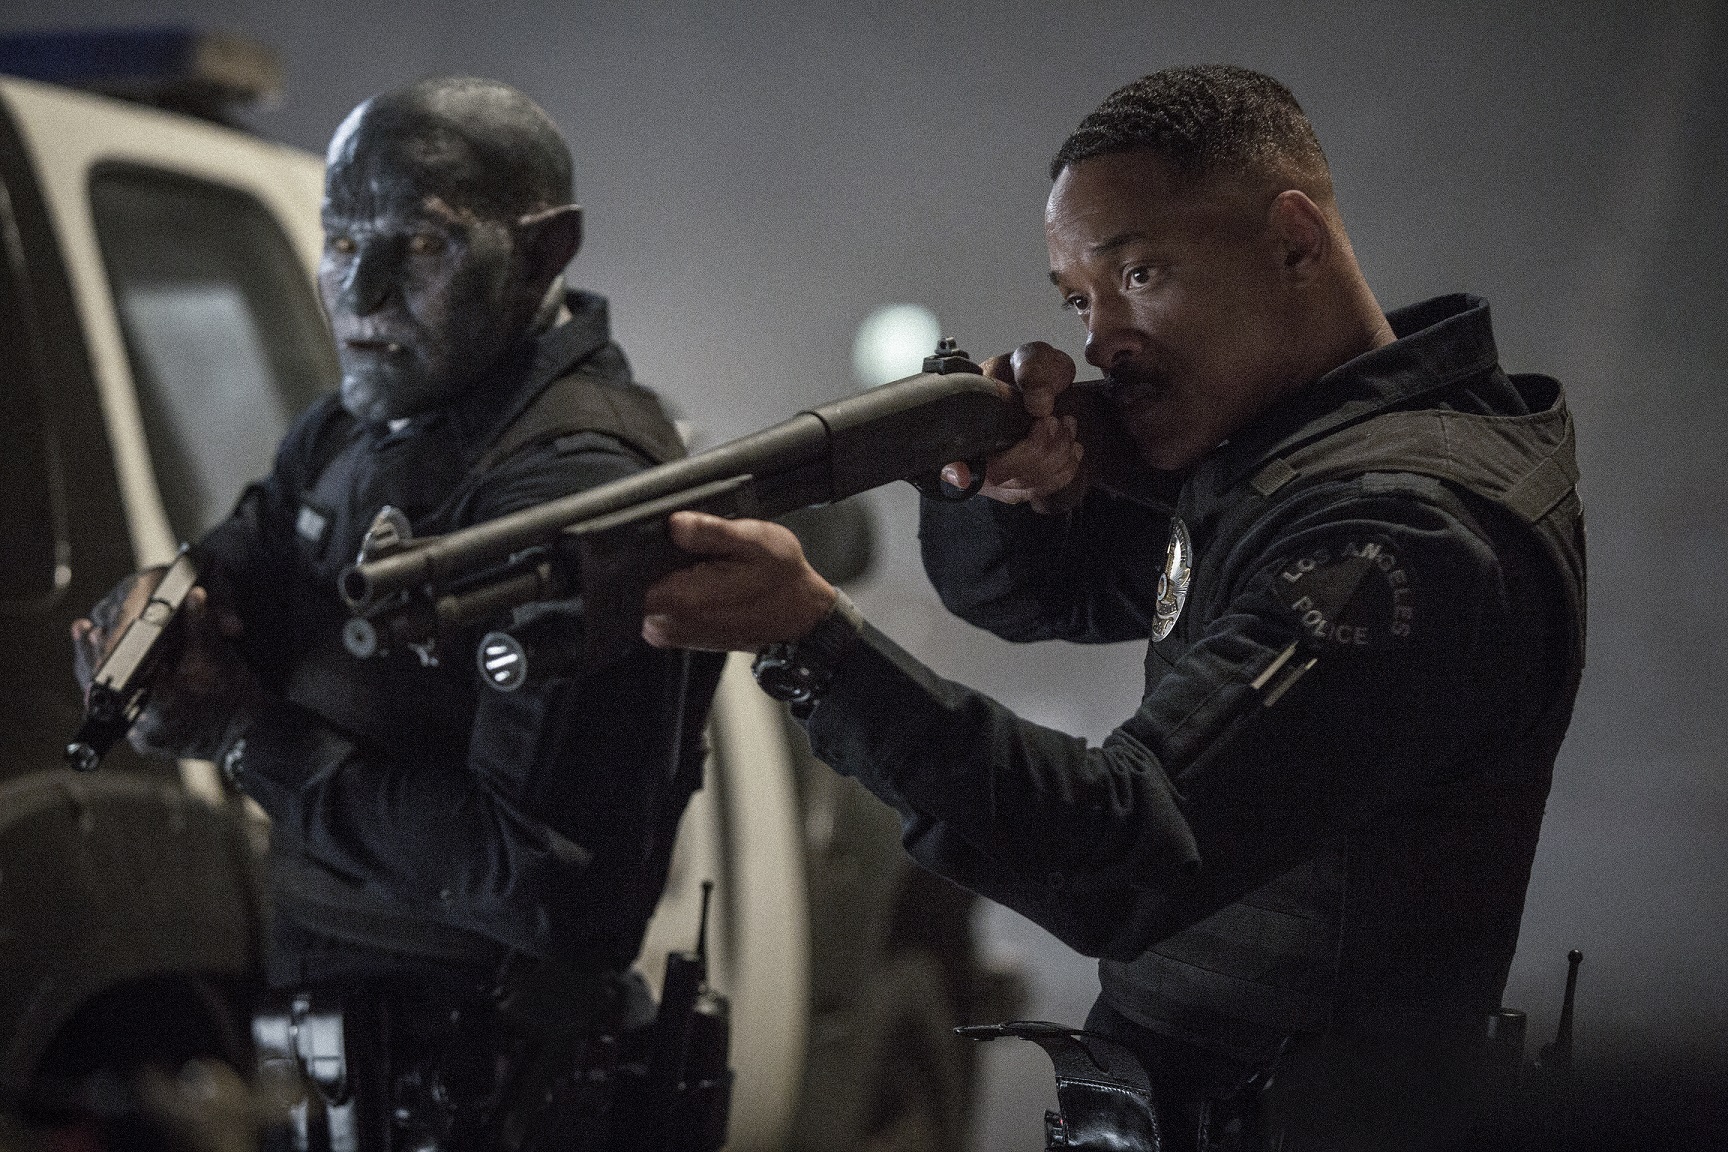 Will Smith and Joel Edgerton in a production still from "Bright." Credit: Netflix